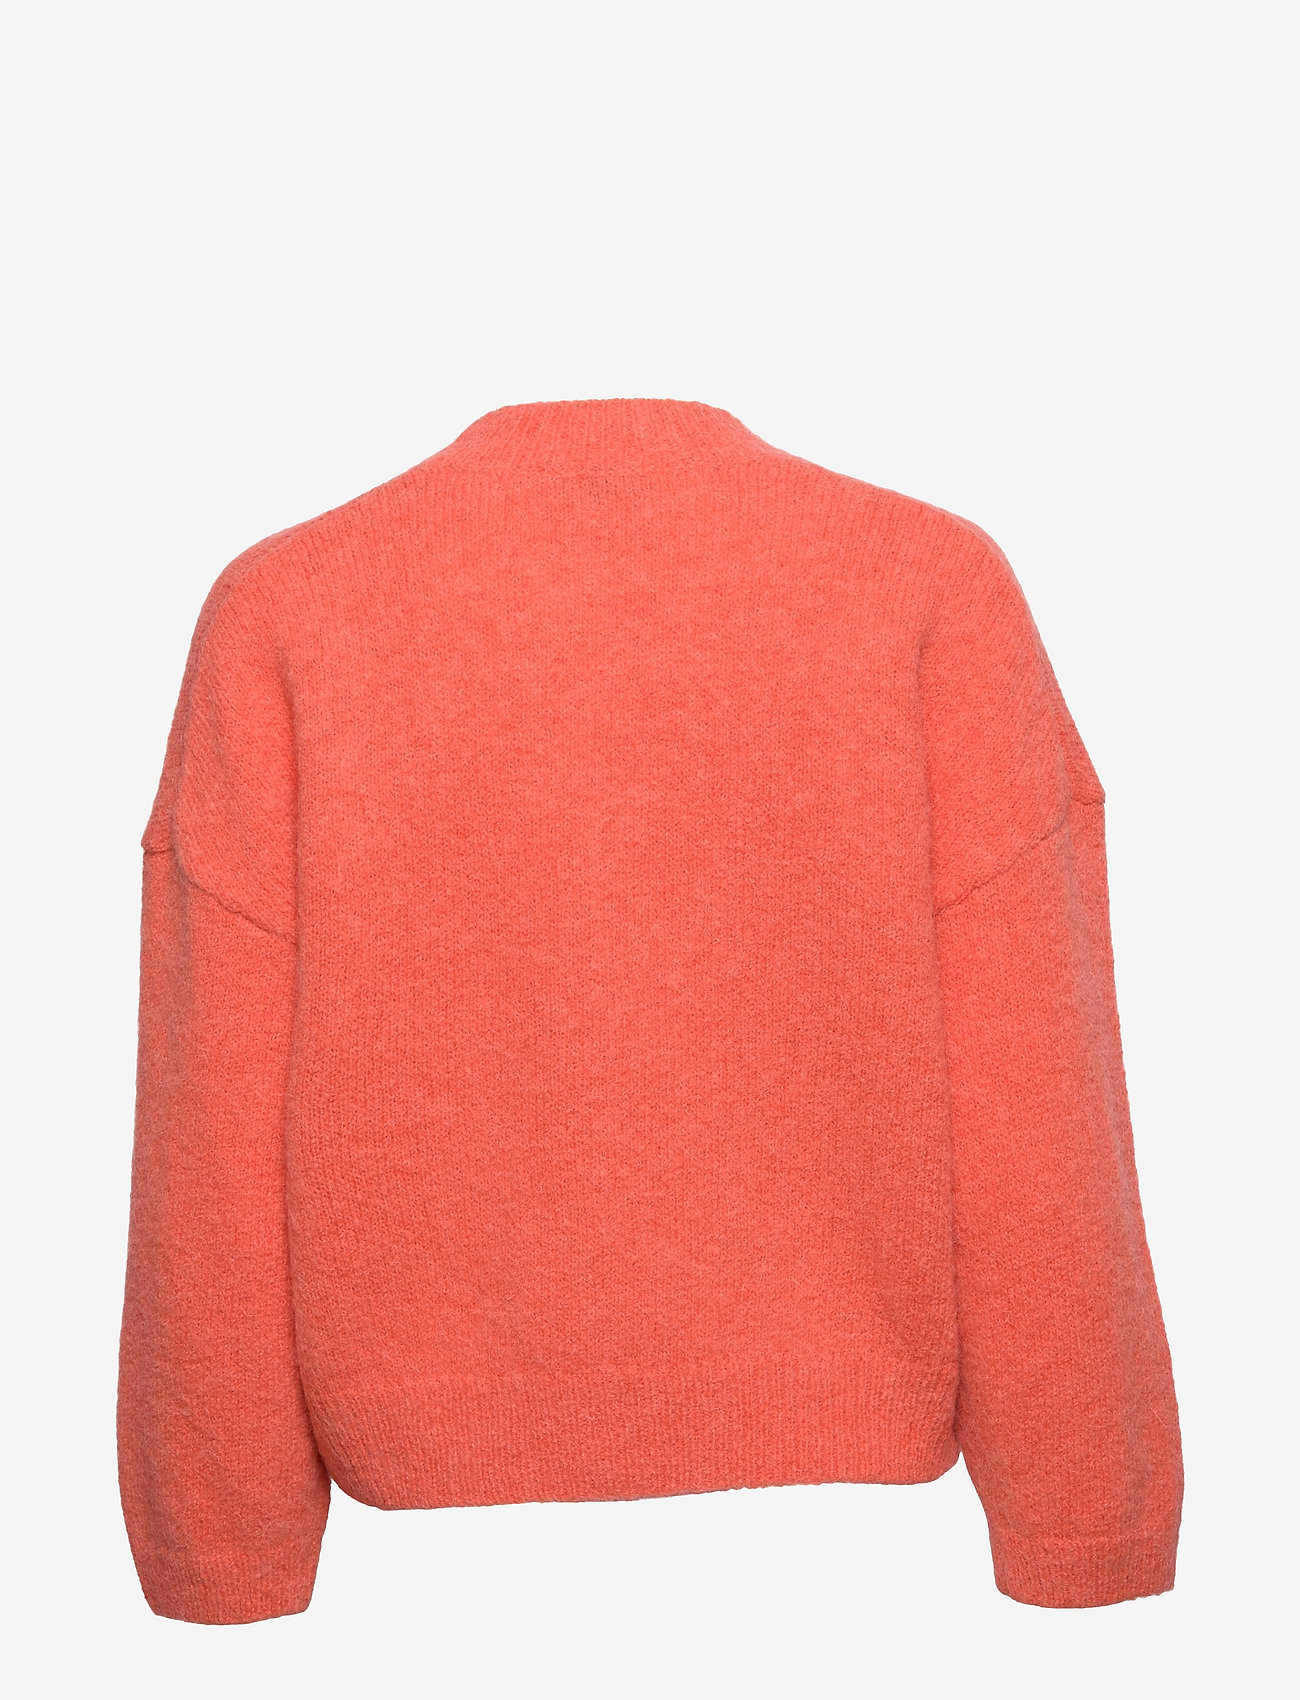 RODEBJER - RODEBJER ALDONZA - cardigans - coral crush - 1